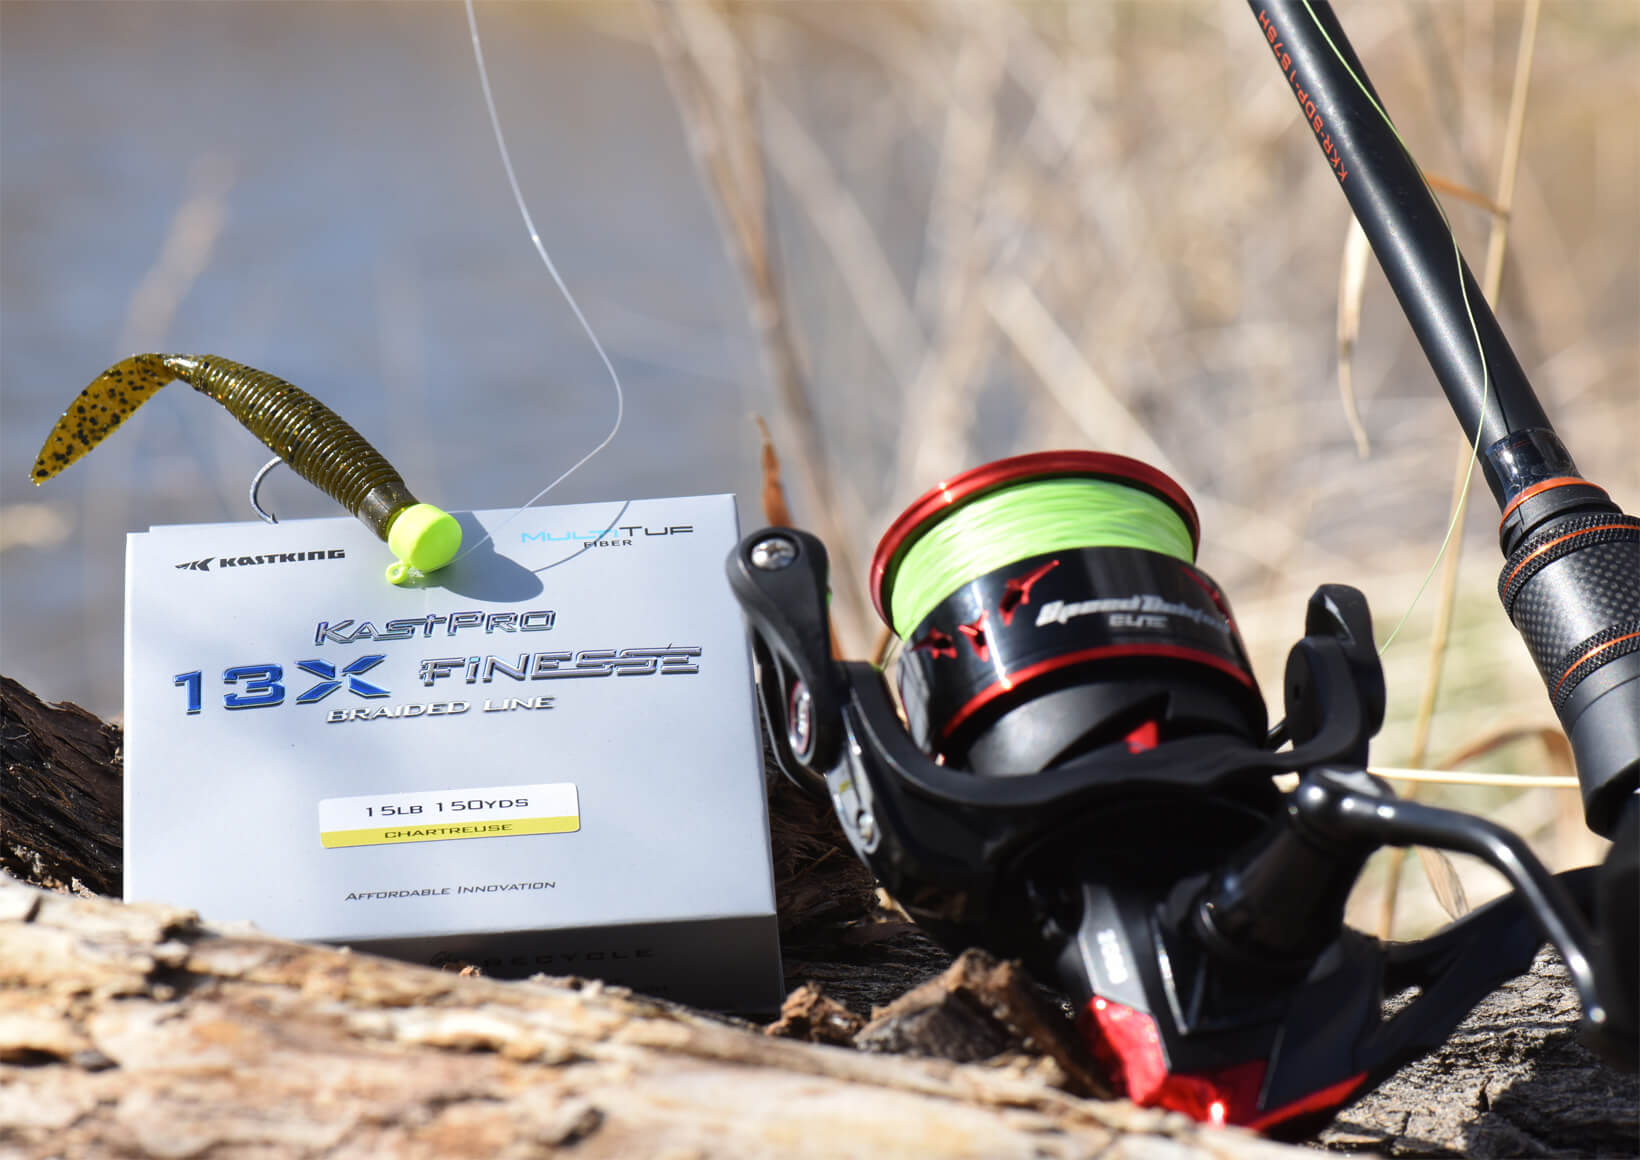 What is Finesse Fishing? What is the Best Fishing Line? – KastKing